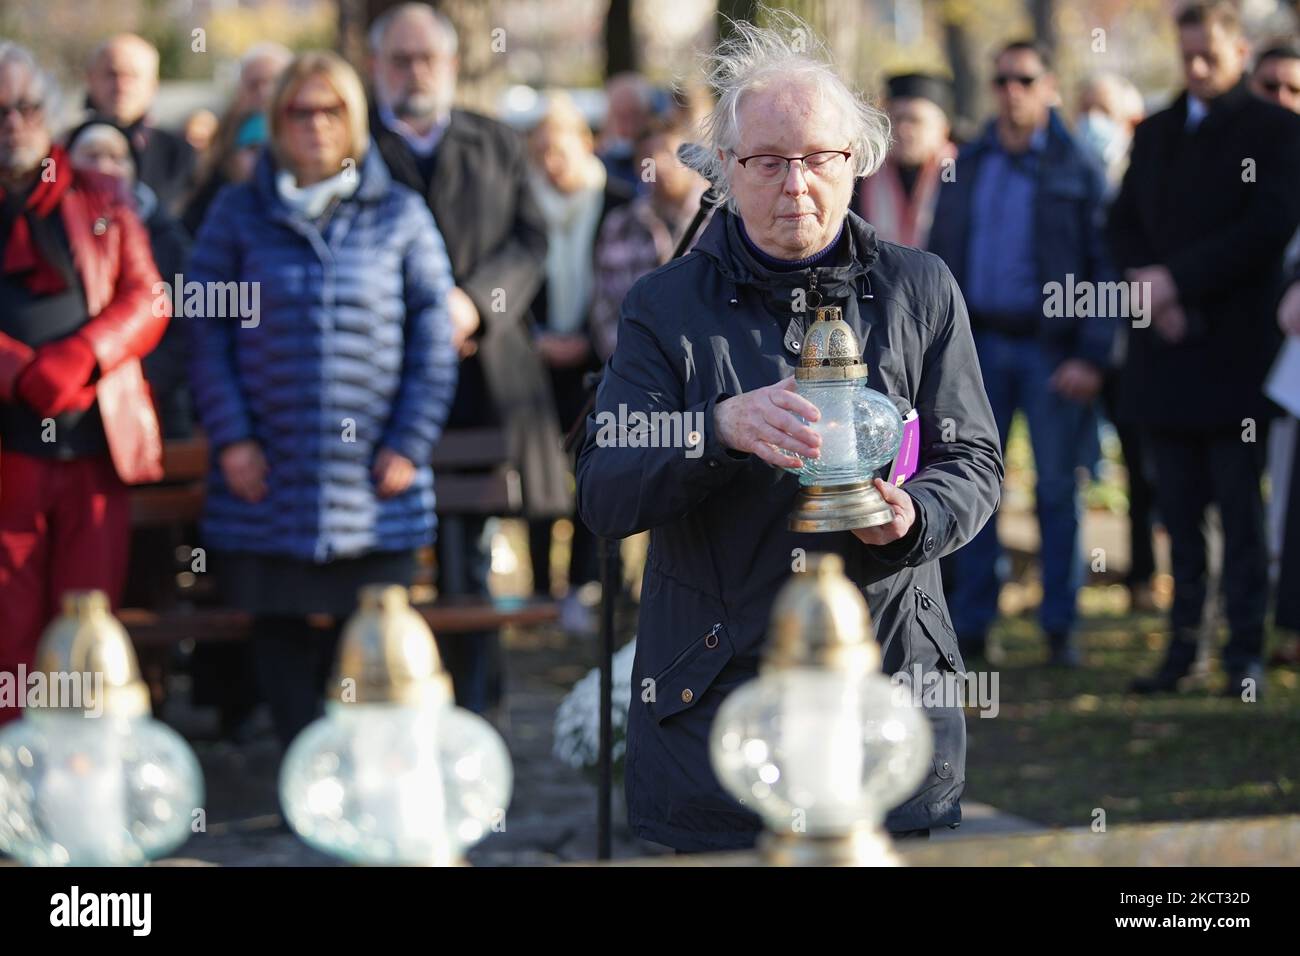 Reader of the Anglican Church Elizabeth Turek during the interfaith ceremony commemorating the dead of various denominations is seen on the Cemetery of Lost Cemeteries in Gdansk, Poland on 1 November 2021 The Cemetery of Lost Cemeteries is a monument that commemorates the necropolis which no longer exists in the city. It is dedicated to the citizens of Gdansk who were once buried in one of the city’s 27 graveyards either destroyed during World War II or bulldozed on purpose after the end of the war. (Photo by Michal Fludra/NurPhoto) Stock Photo